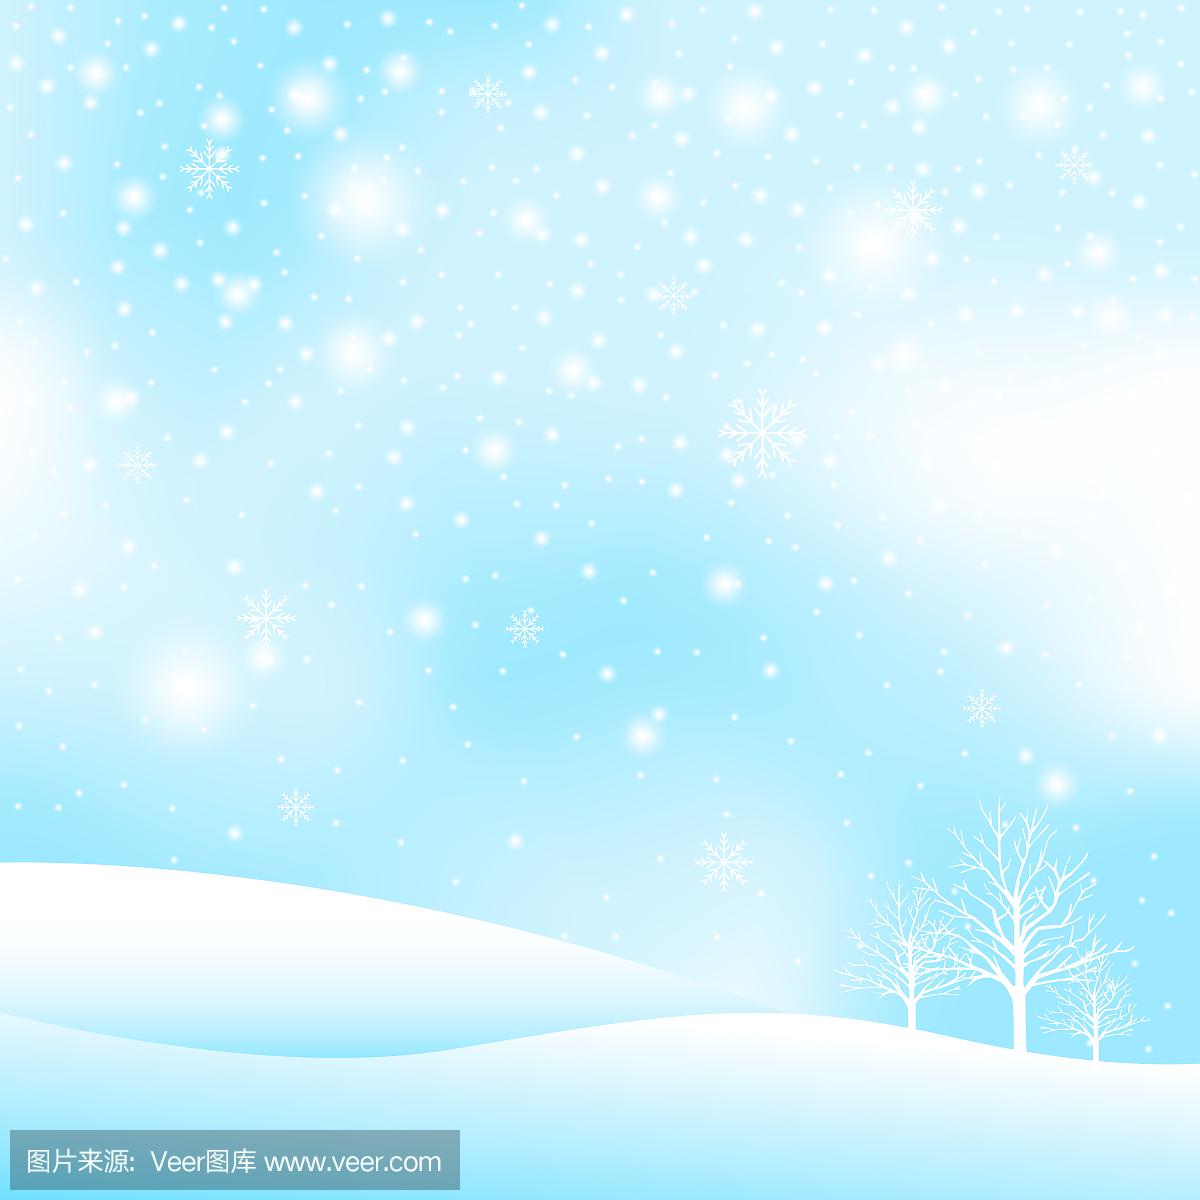 snow, snowflake and winter background vector 